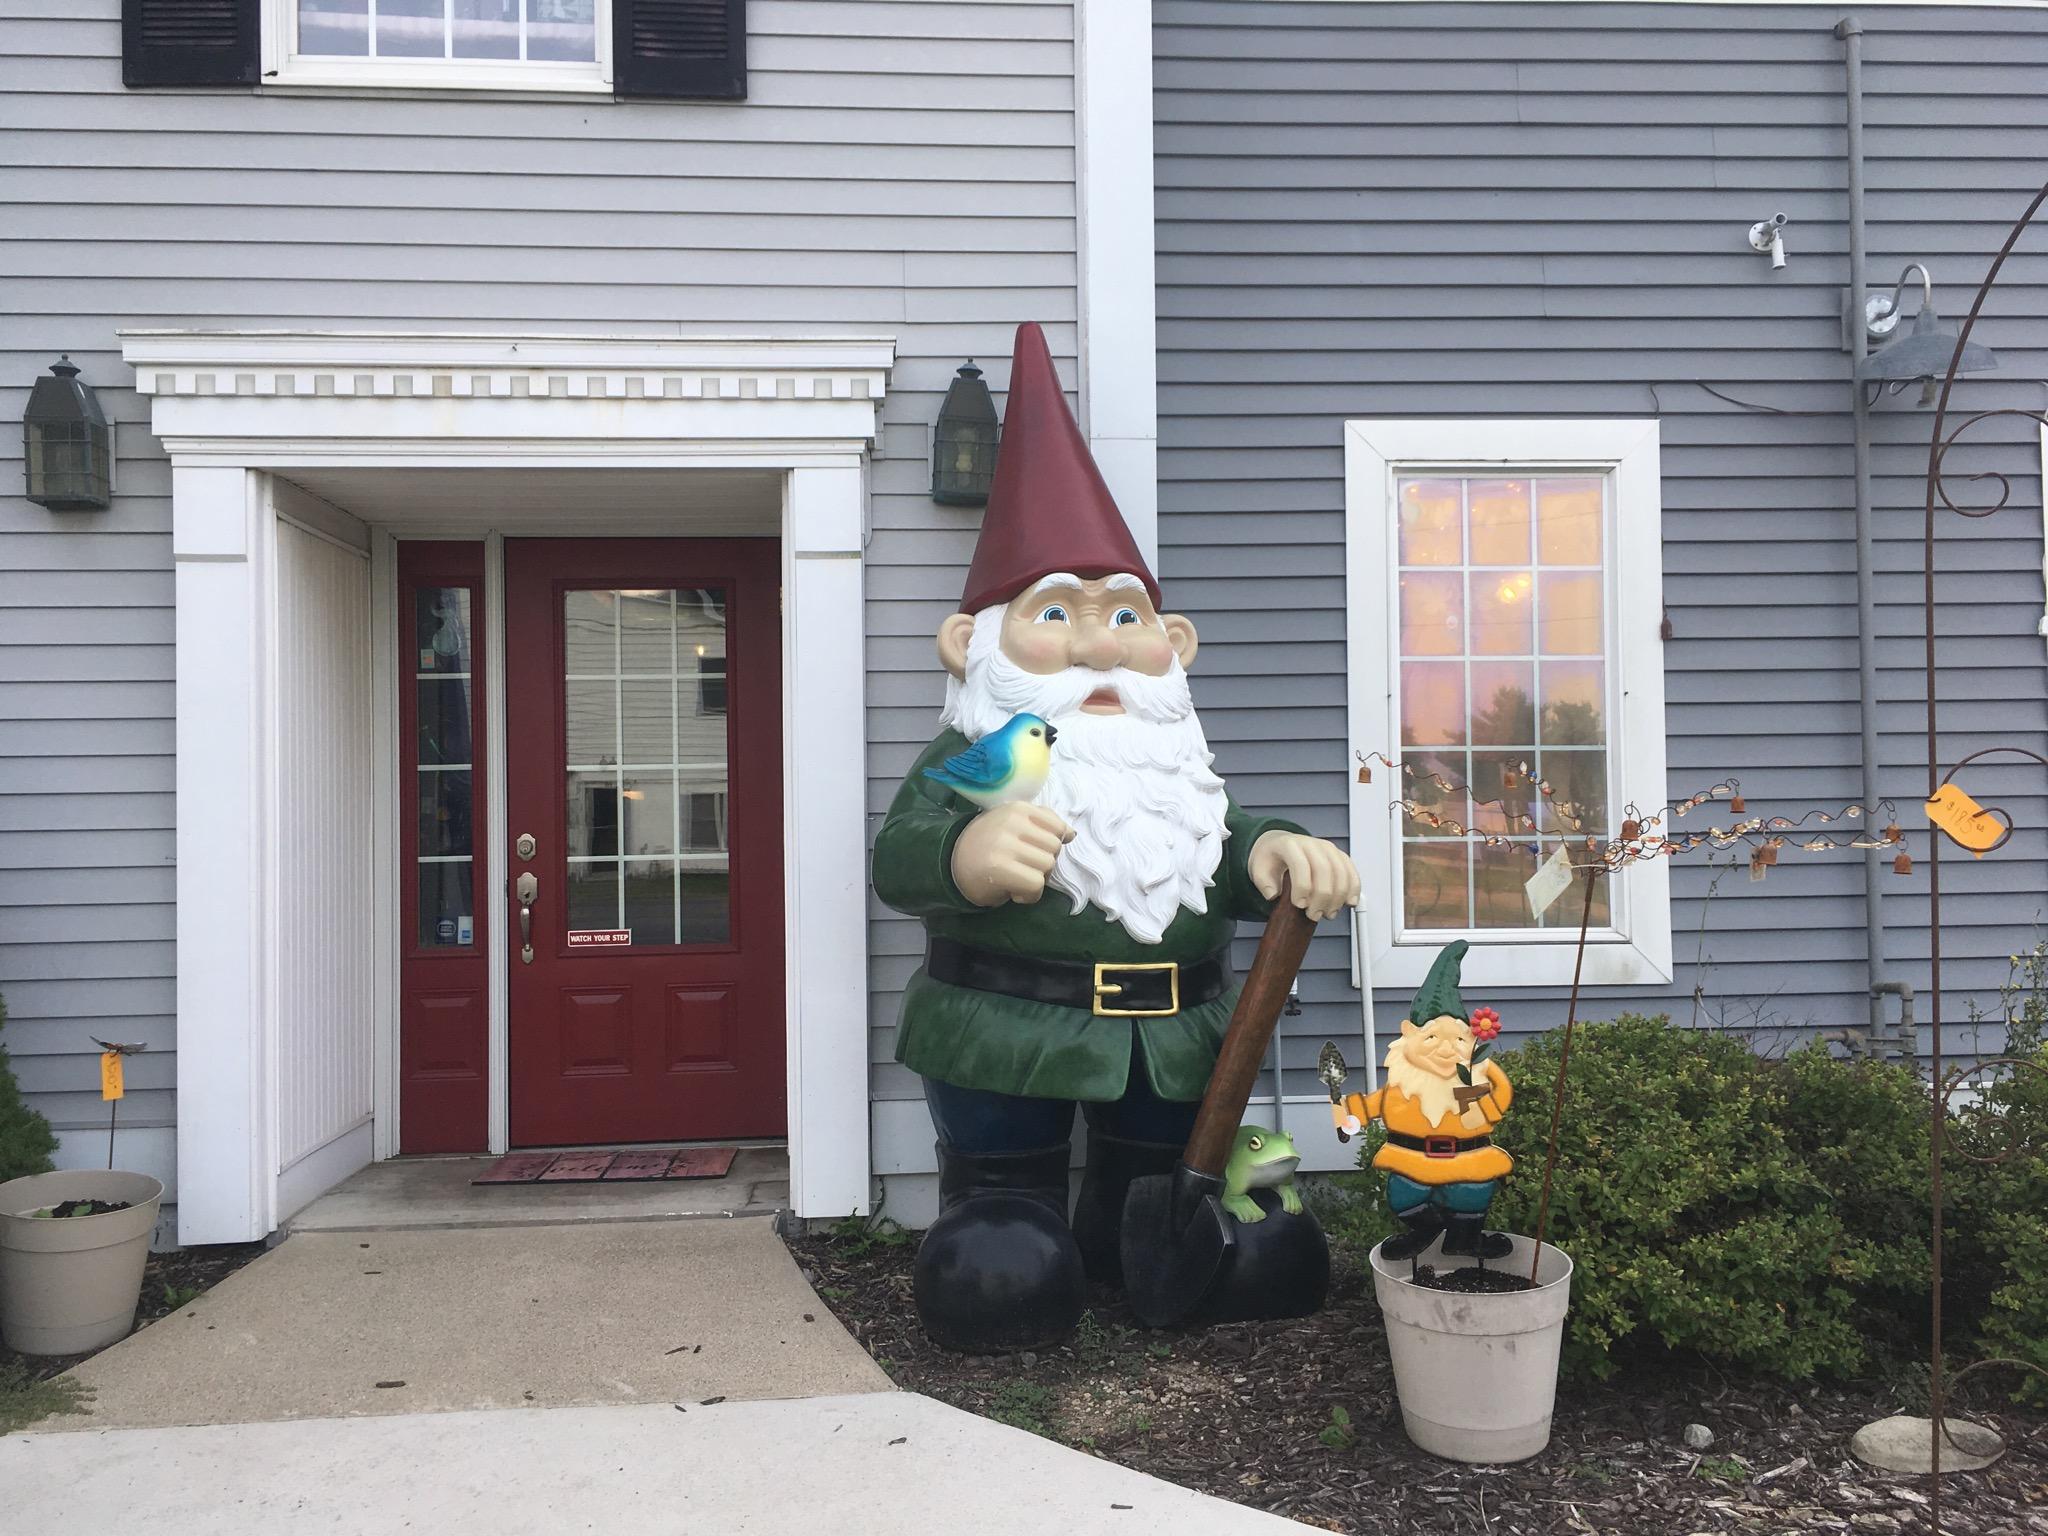 Oversized lawn gnome